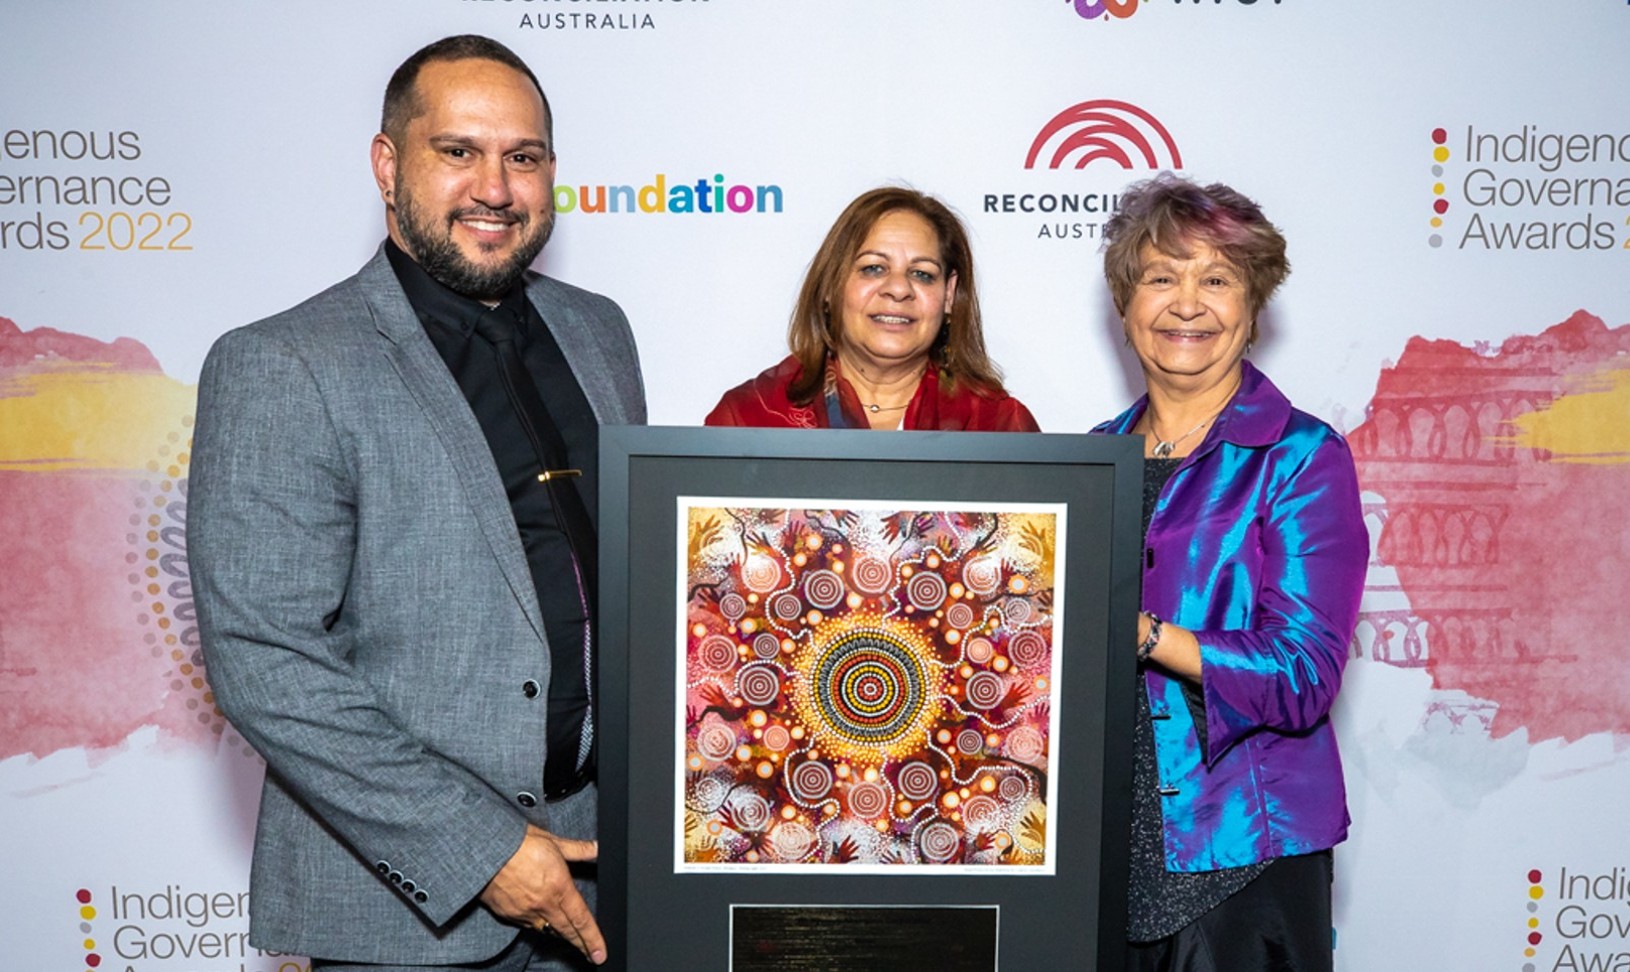 A man and two women in front of a banner holding an Indigenous Governance Award